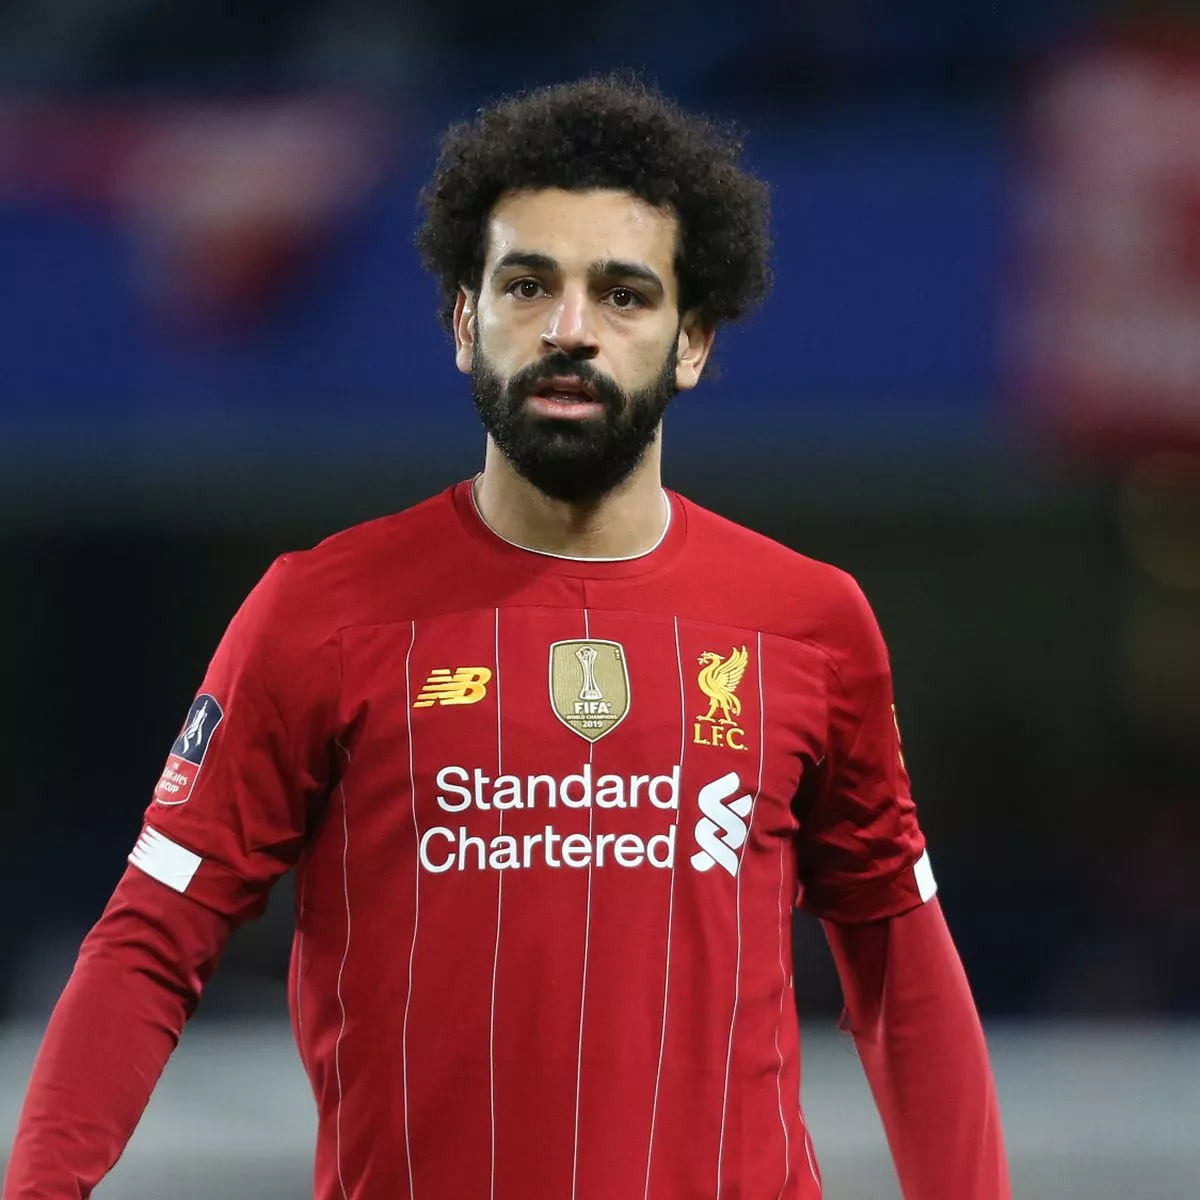 Liverpool legend names the one player whose departure would be a 'bigger blow' than Salah - Strategies for Liverpool to mitigate the loss